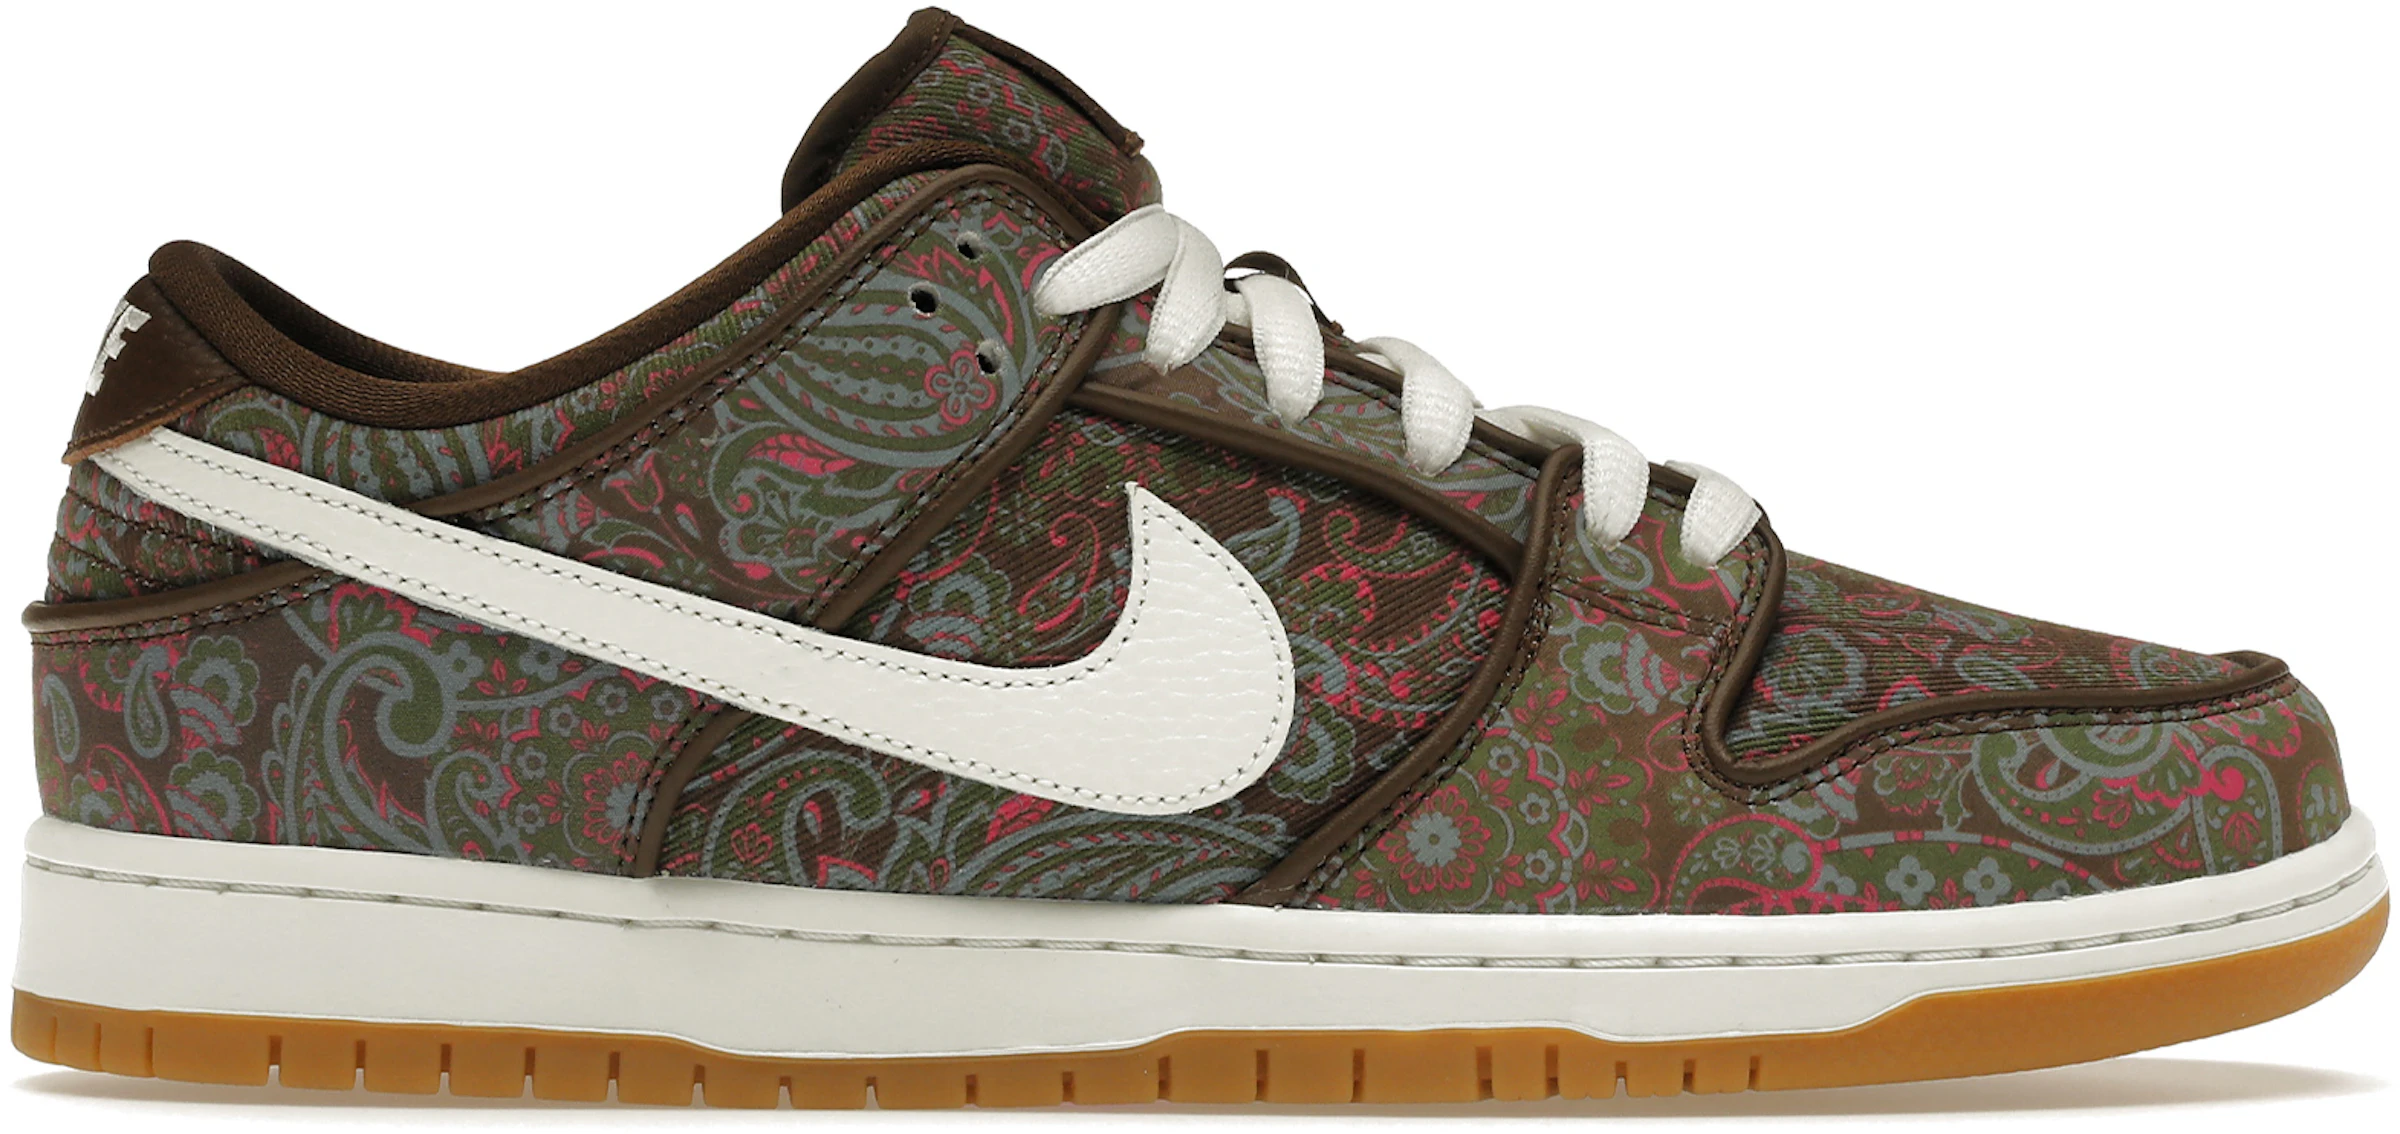 Total 37+ imagen nike sb brown shoes - Abzlocal.mx